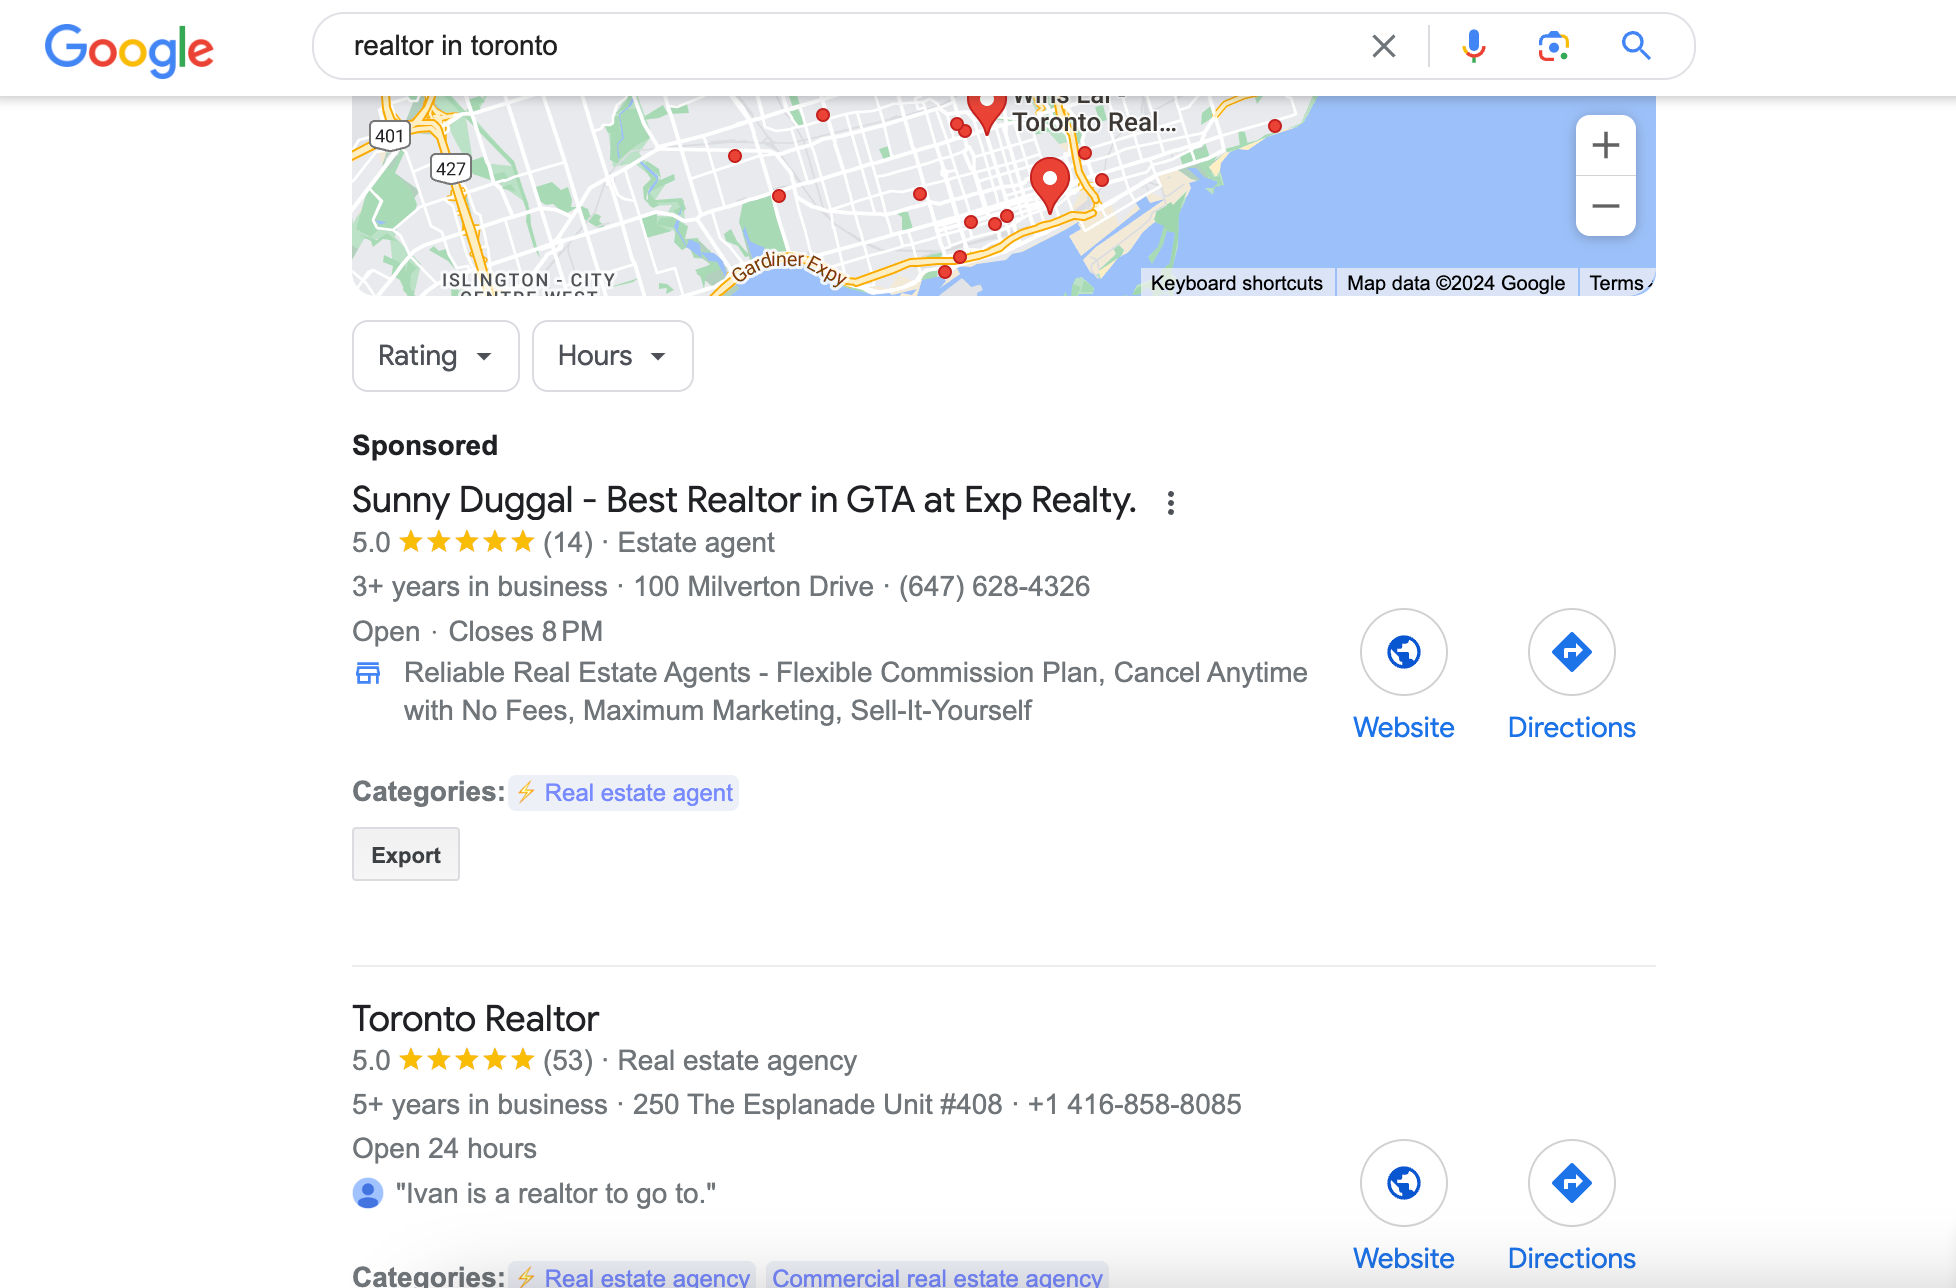 The Example of Google Business Profile for Realtor in Toronto